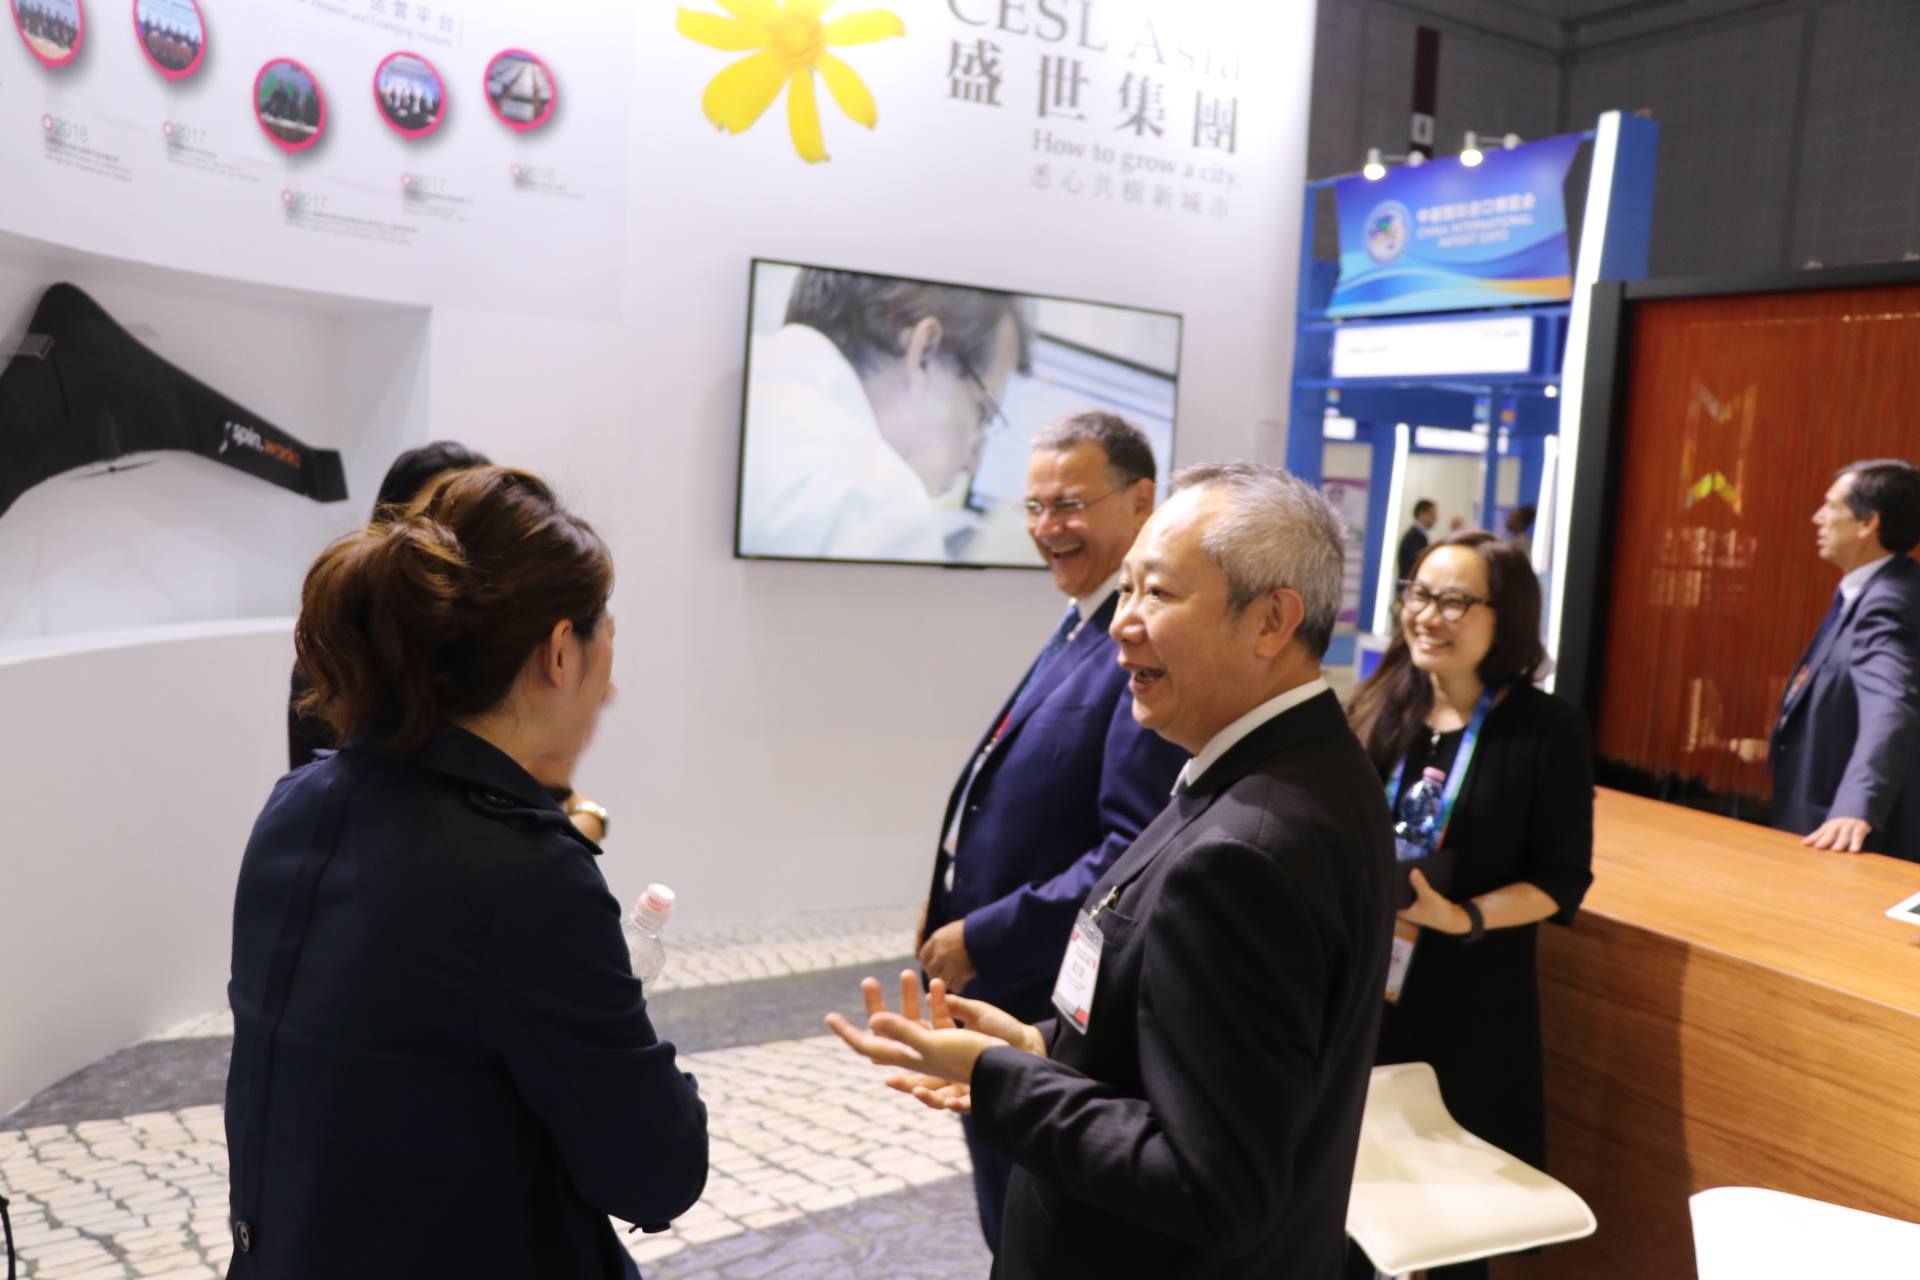 CESL Asia Showcases its Pivot Role as a Platform between China and Portuguese-speaking Countries (PSC) in the China International Import Expo (CIIE)